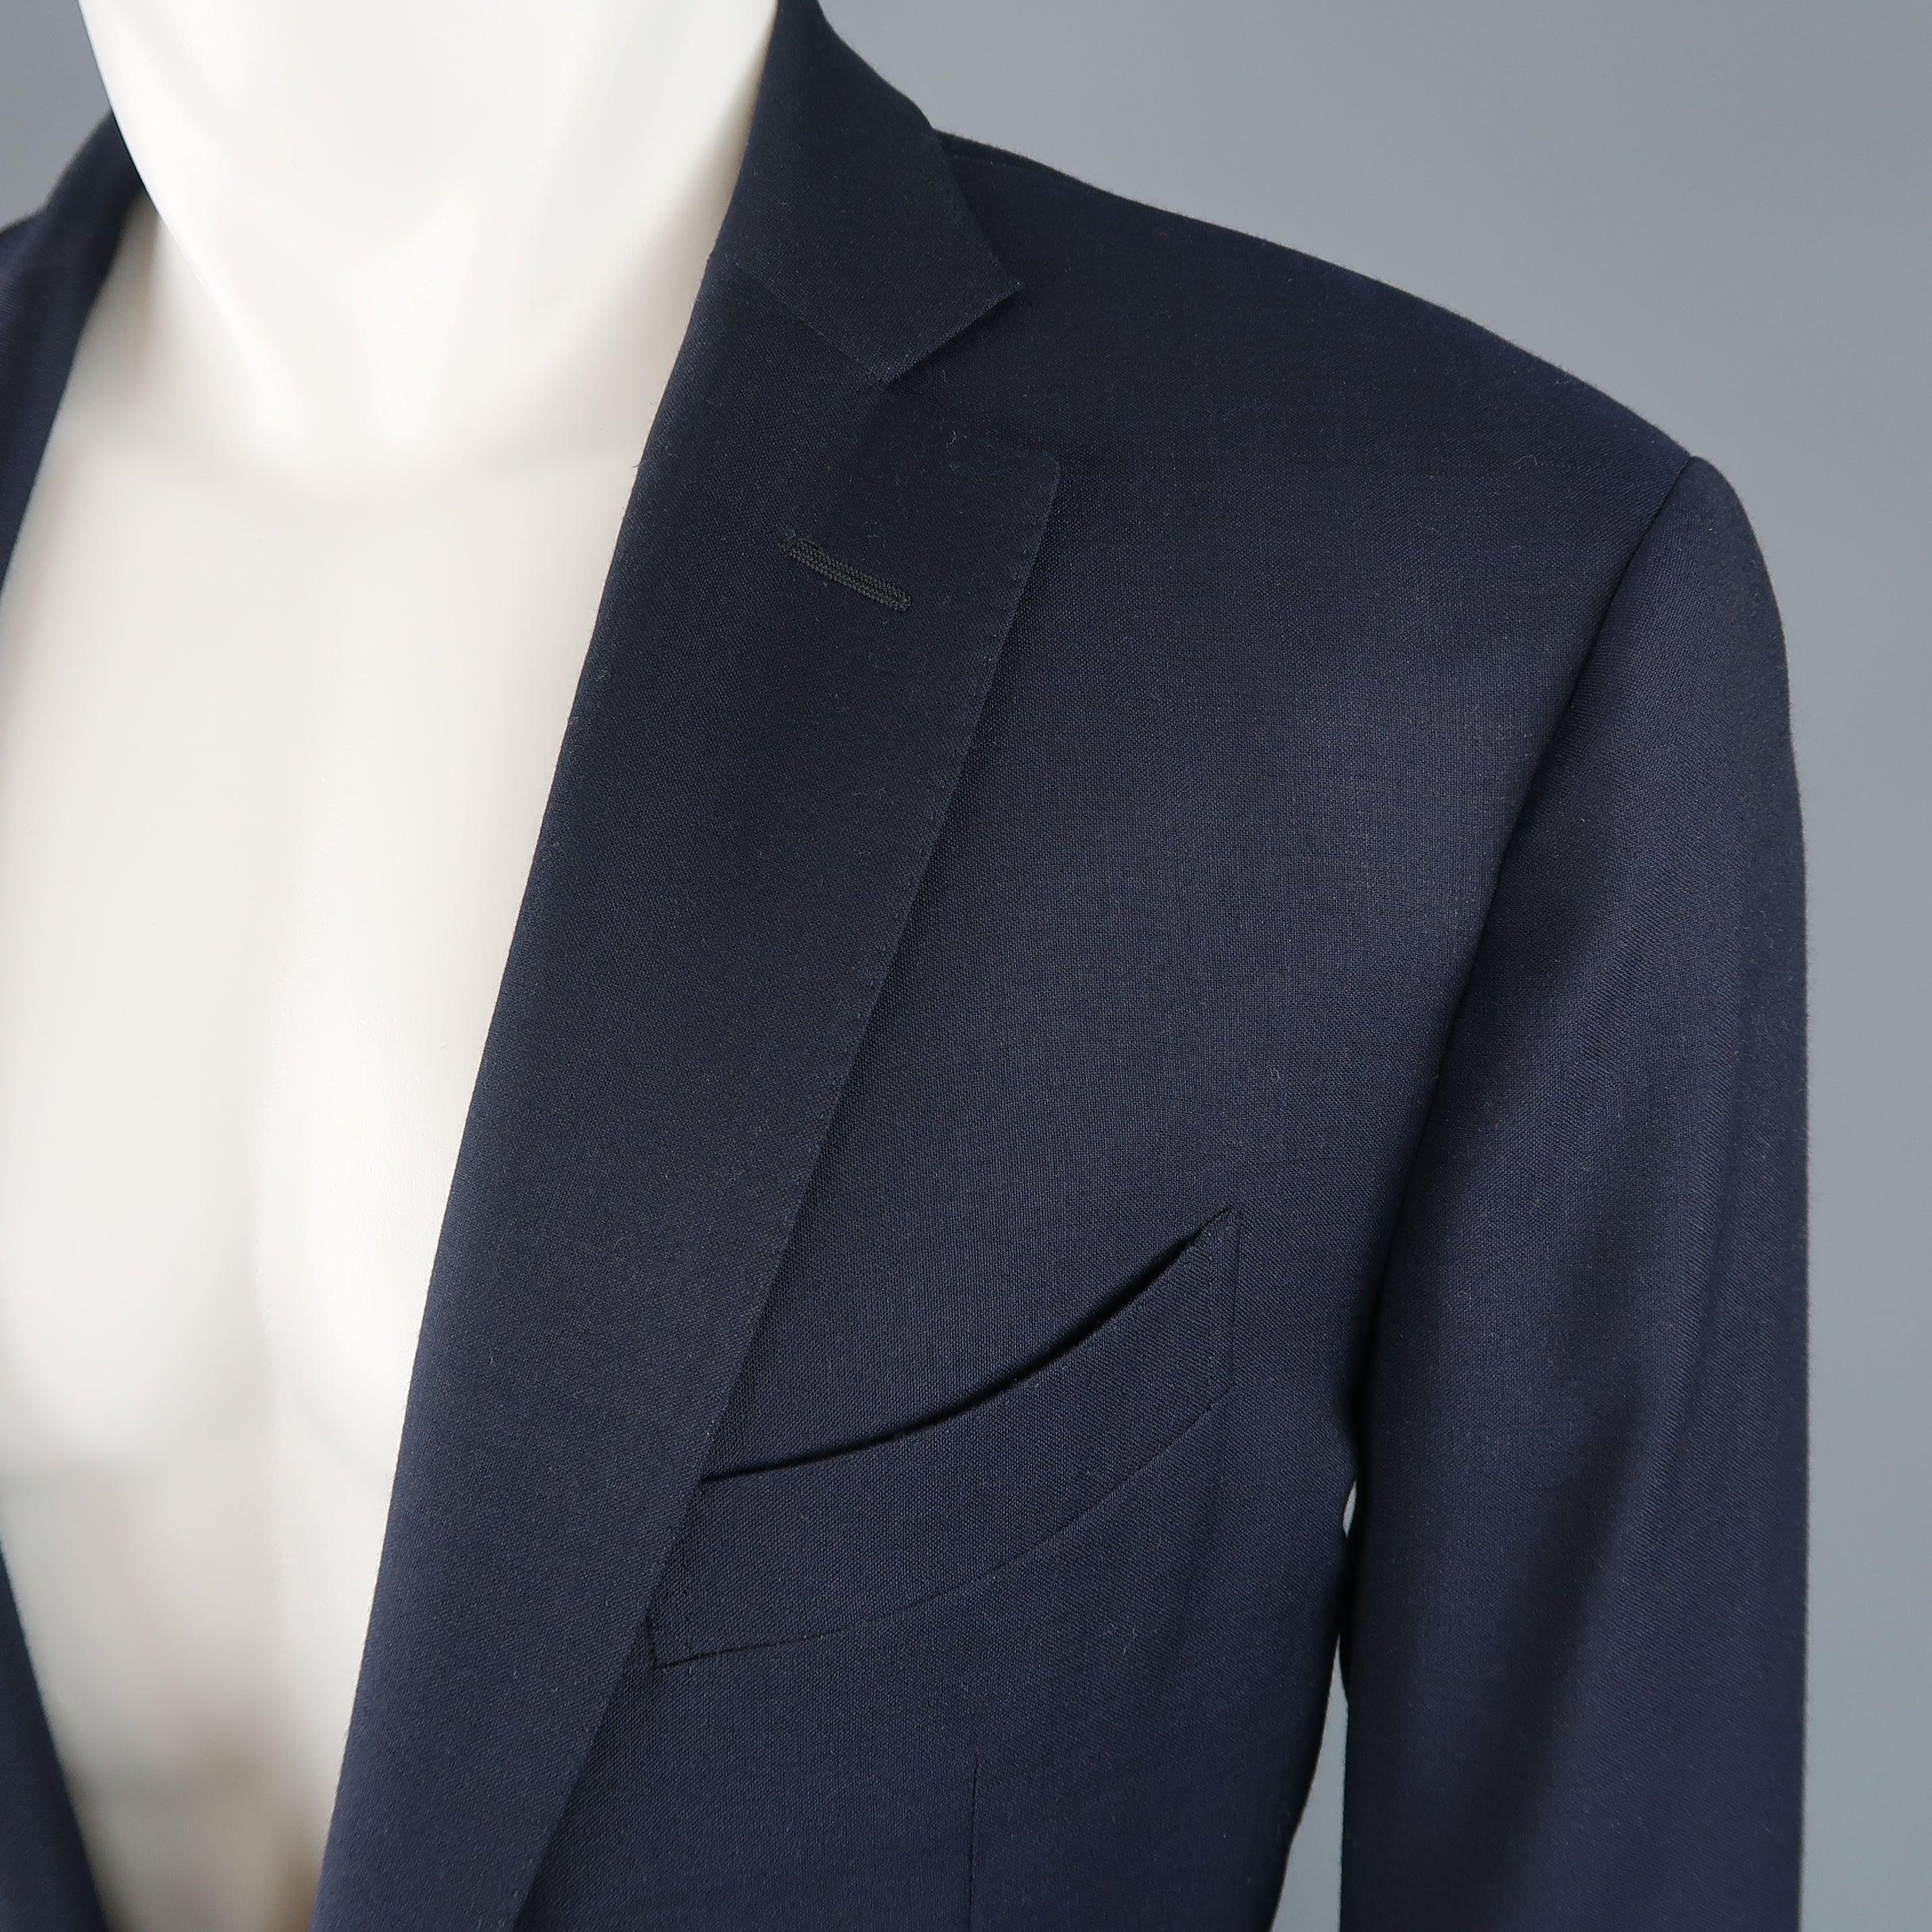 Single breasted ERMENEGILDO ZEGNA sport coat comes in navy wool with a notch lapel, two button front, glenplaid liner, and top stitching throughout. Made in Italy.Good Pre-Owned Condition. 

Marked:   IT 54 

Measurements: 
 
Shoulder: 18 inches